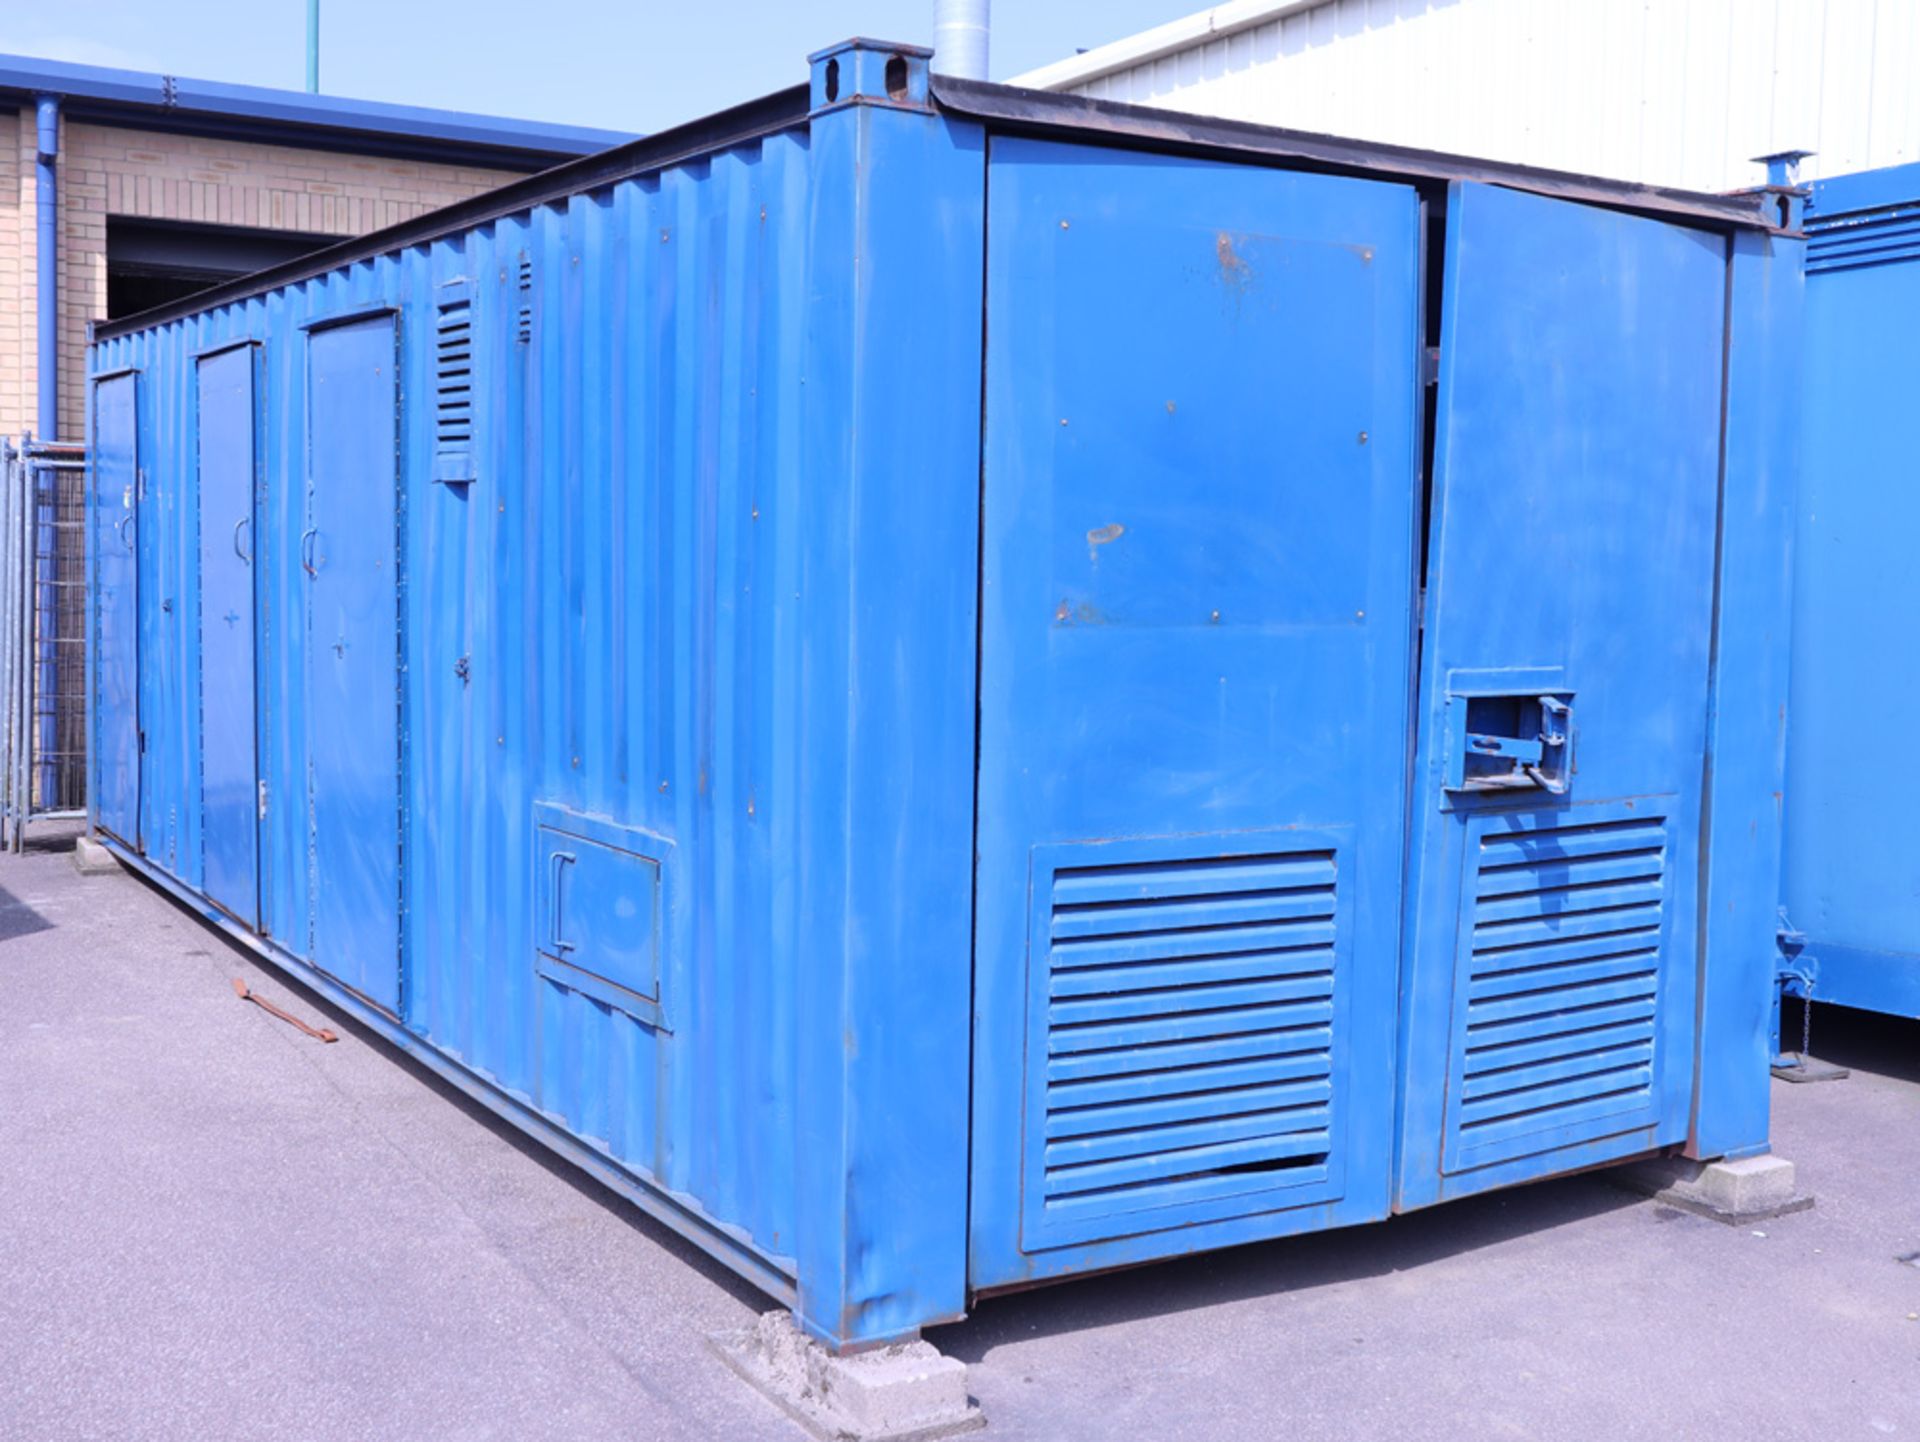 24ft by 9ft welfare unit with large diesel engine generator, single chemical toilet, large office/